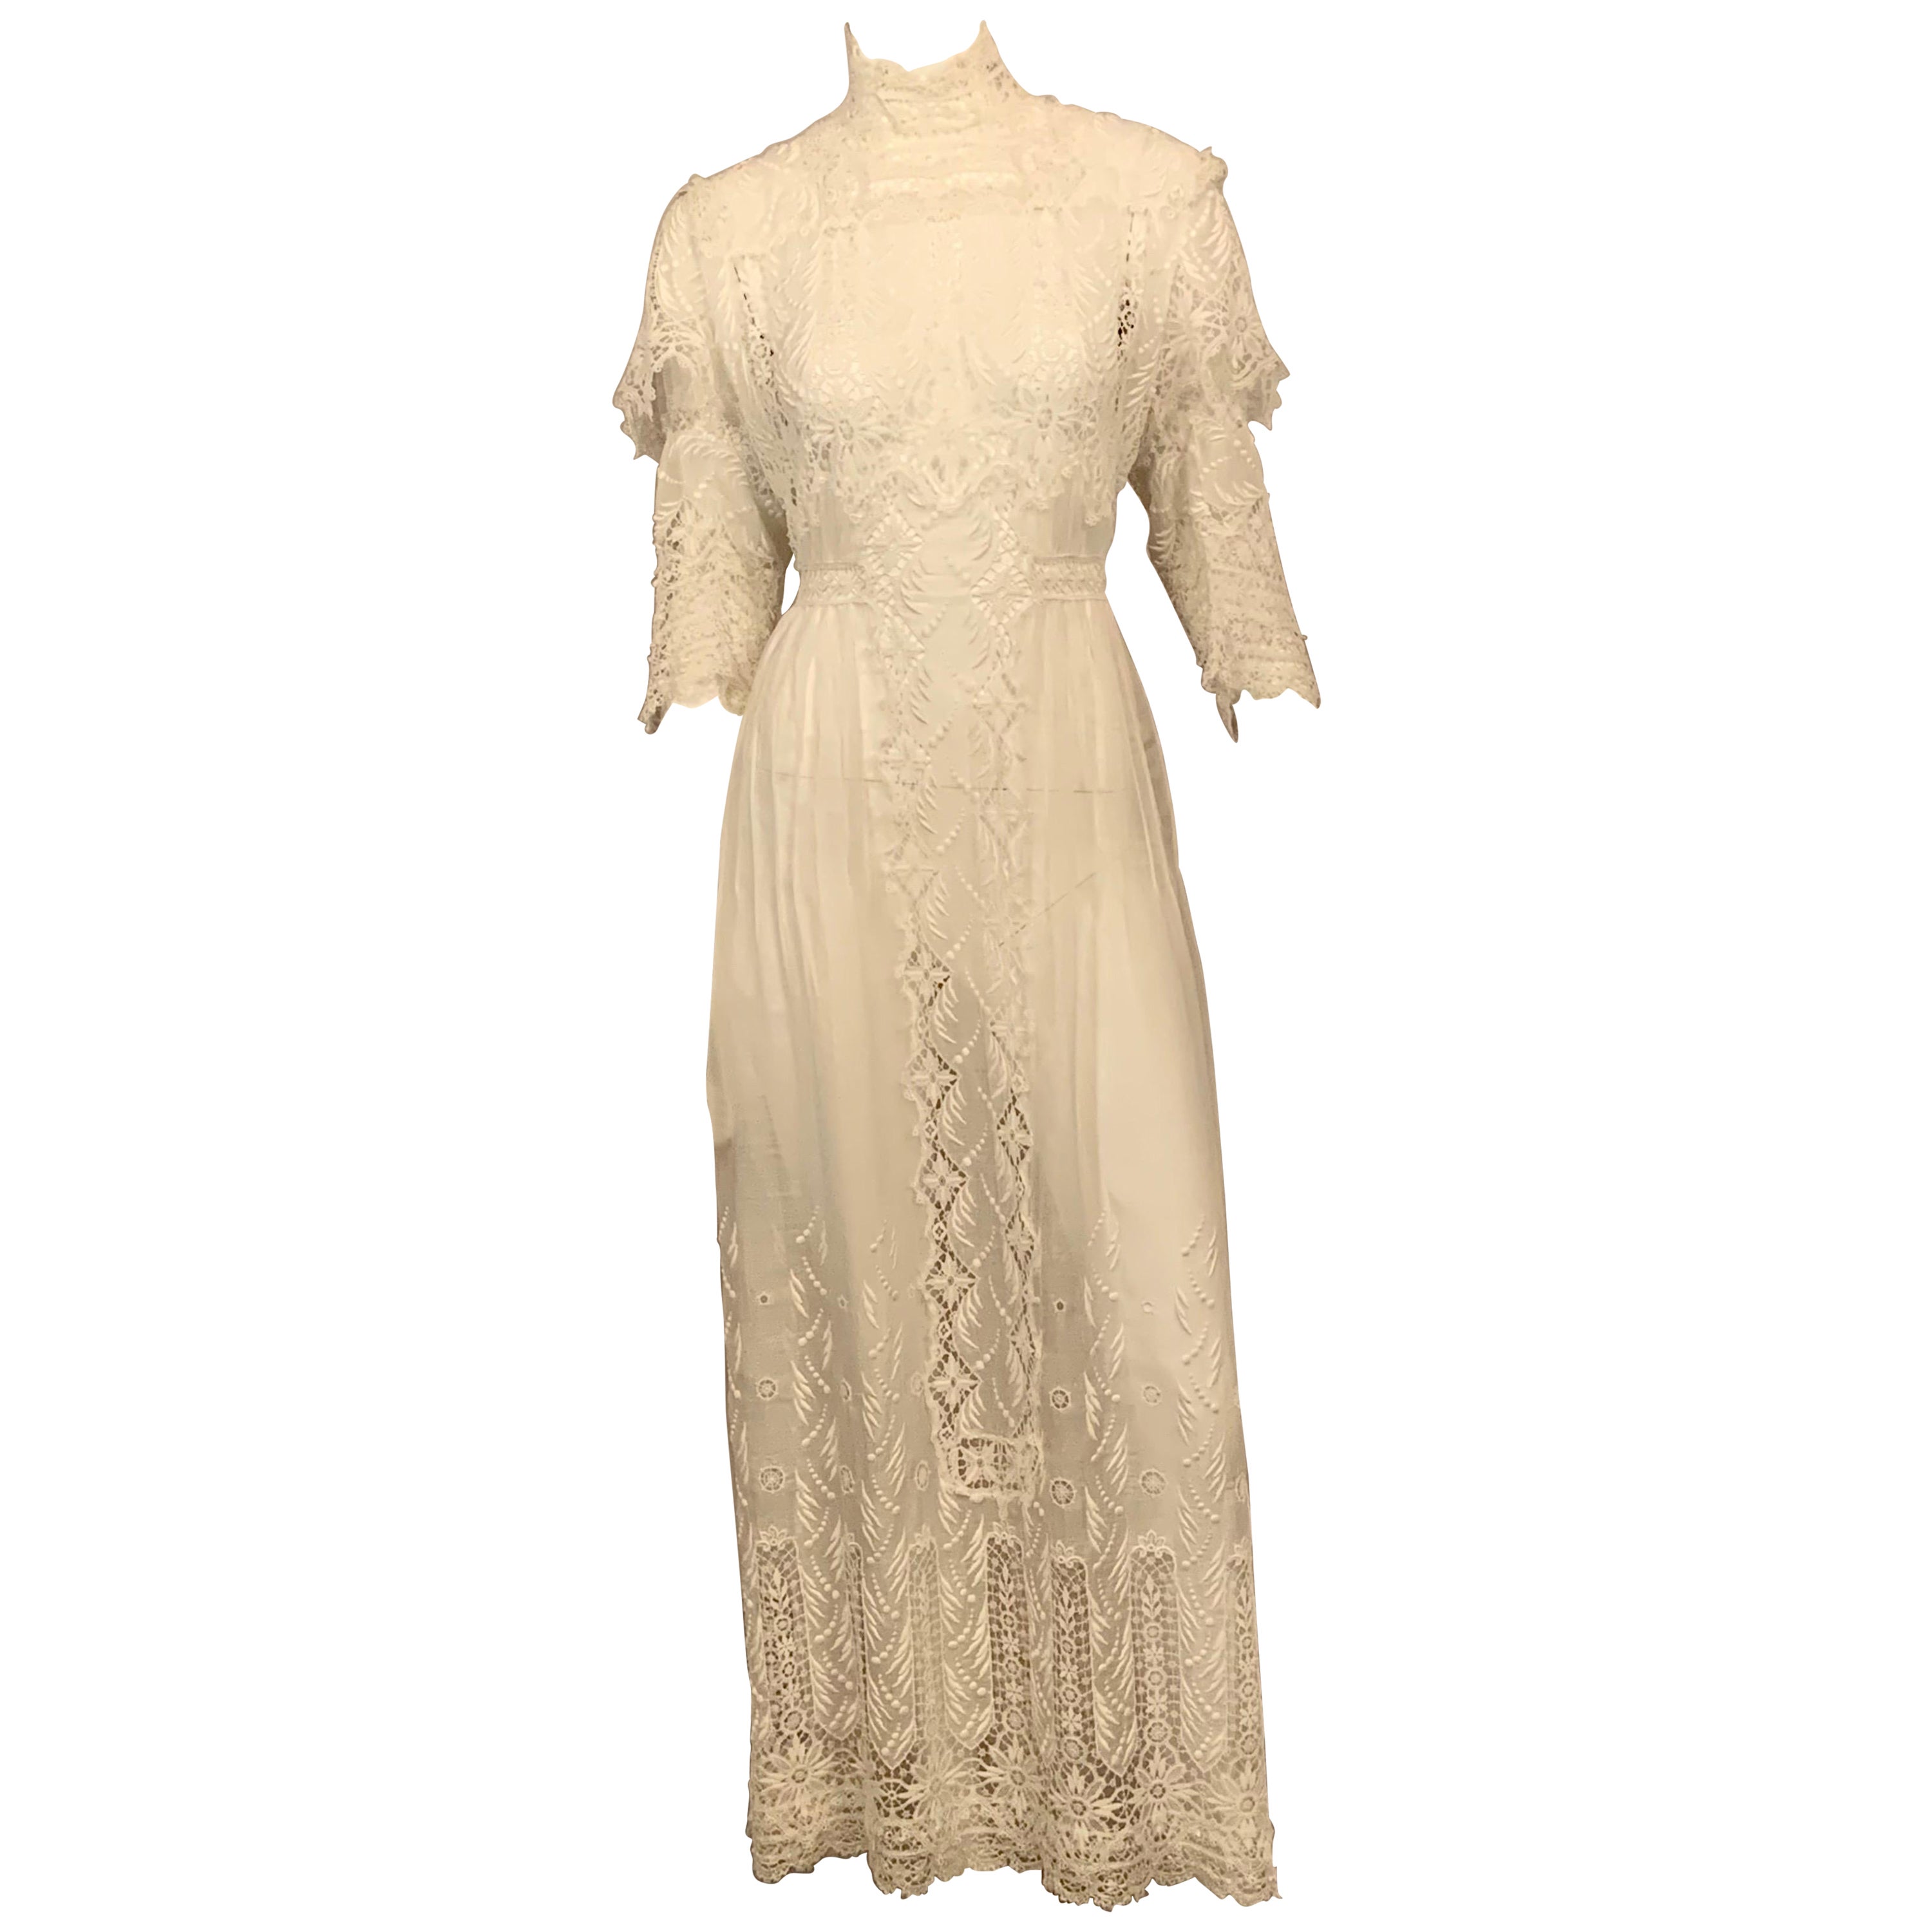 Victorian Bright White High Neck Lace and Embroidered Handkerchief Linen Dress  